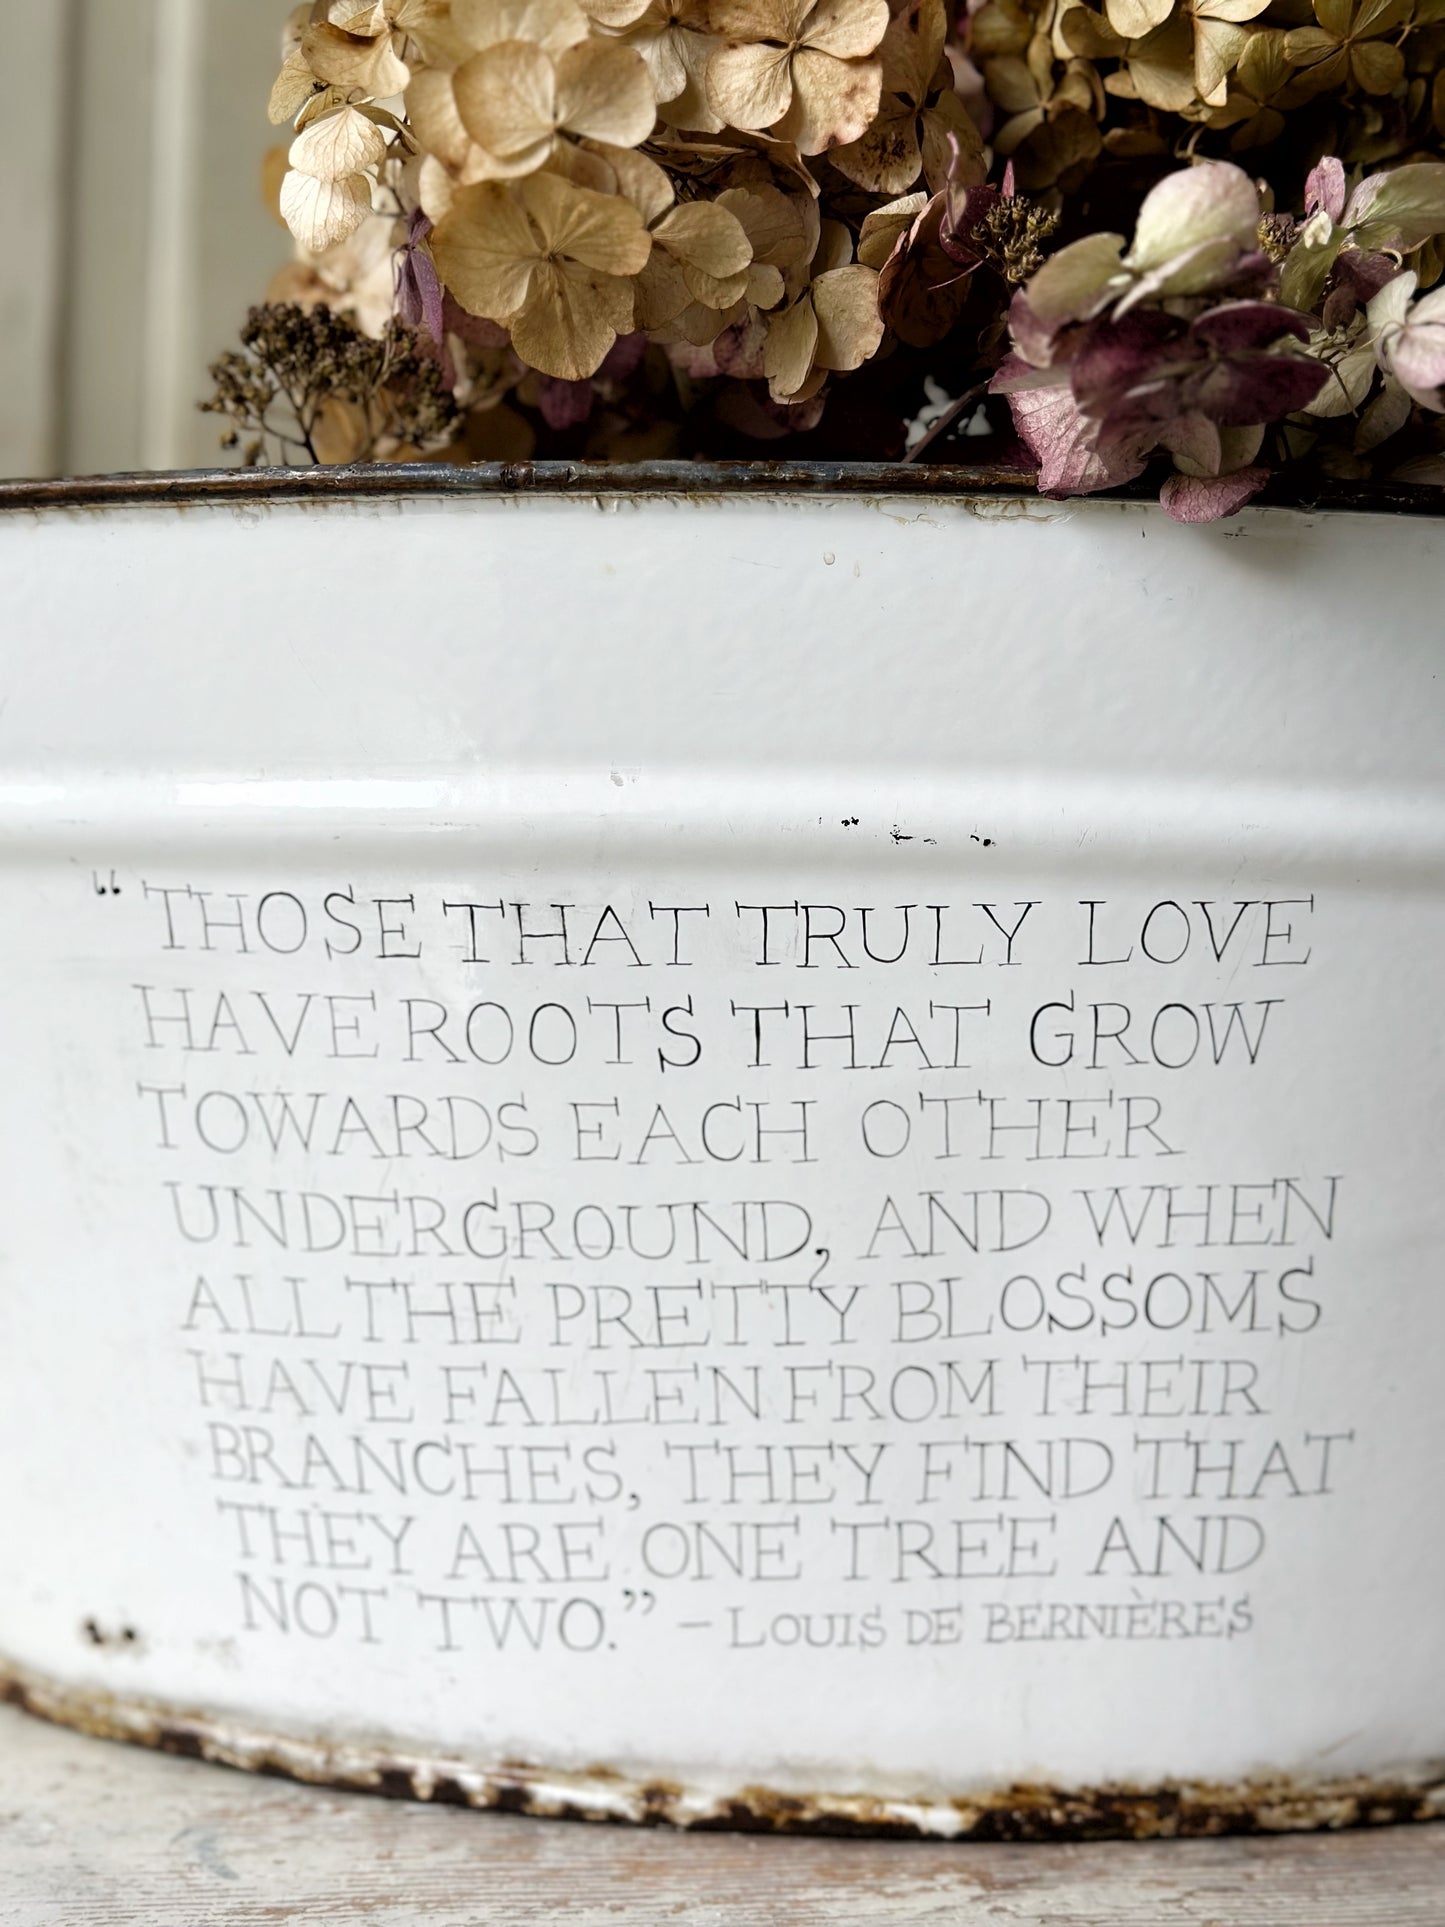 A rustic time worn white enamel oval bath hand painted with a quote.